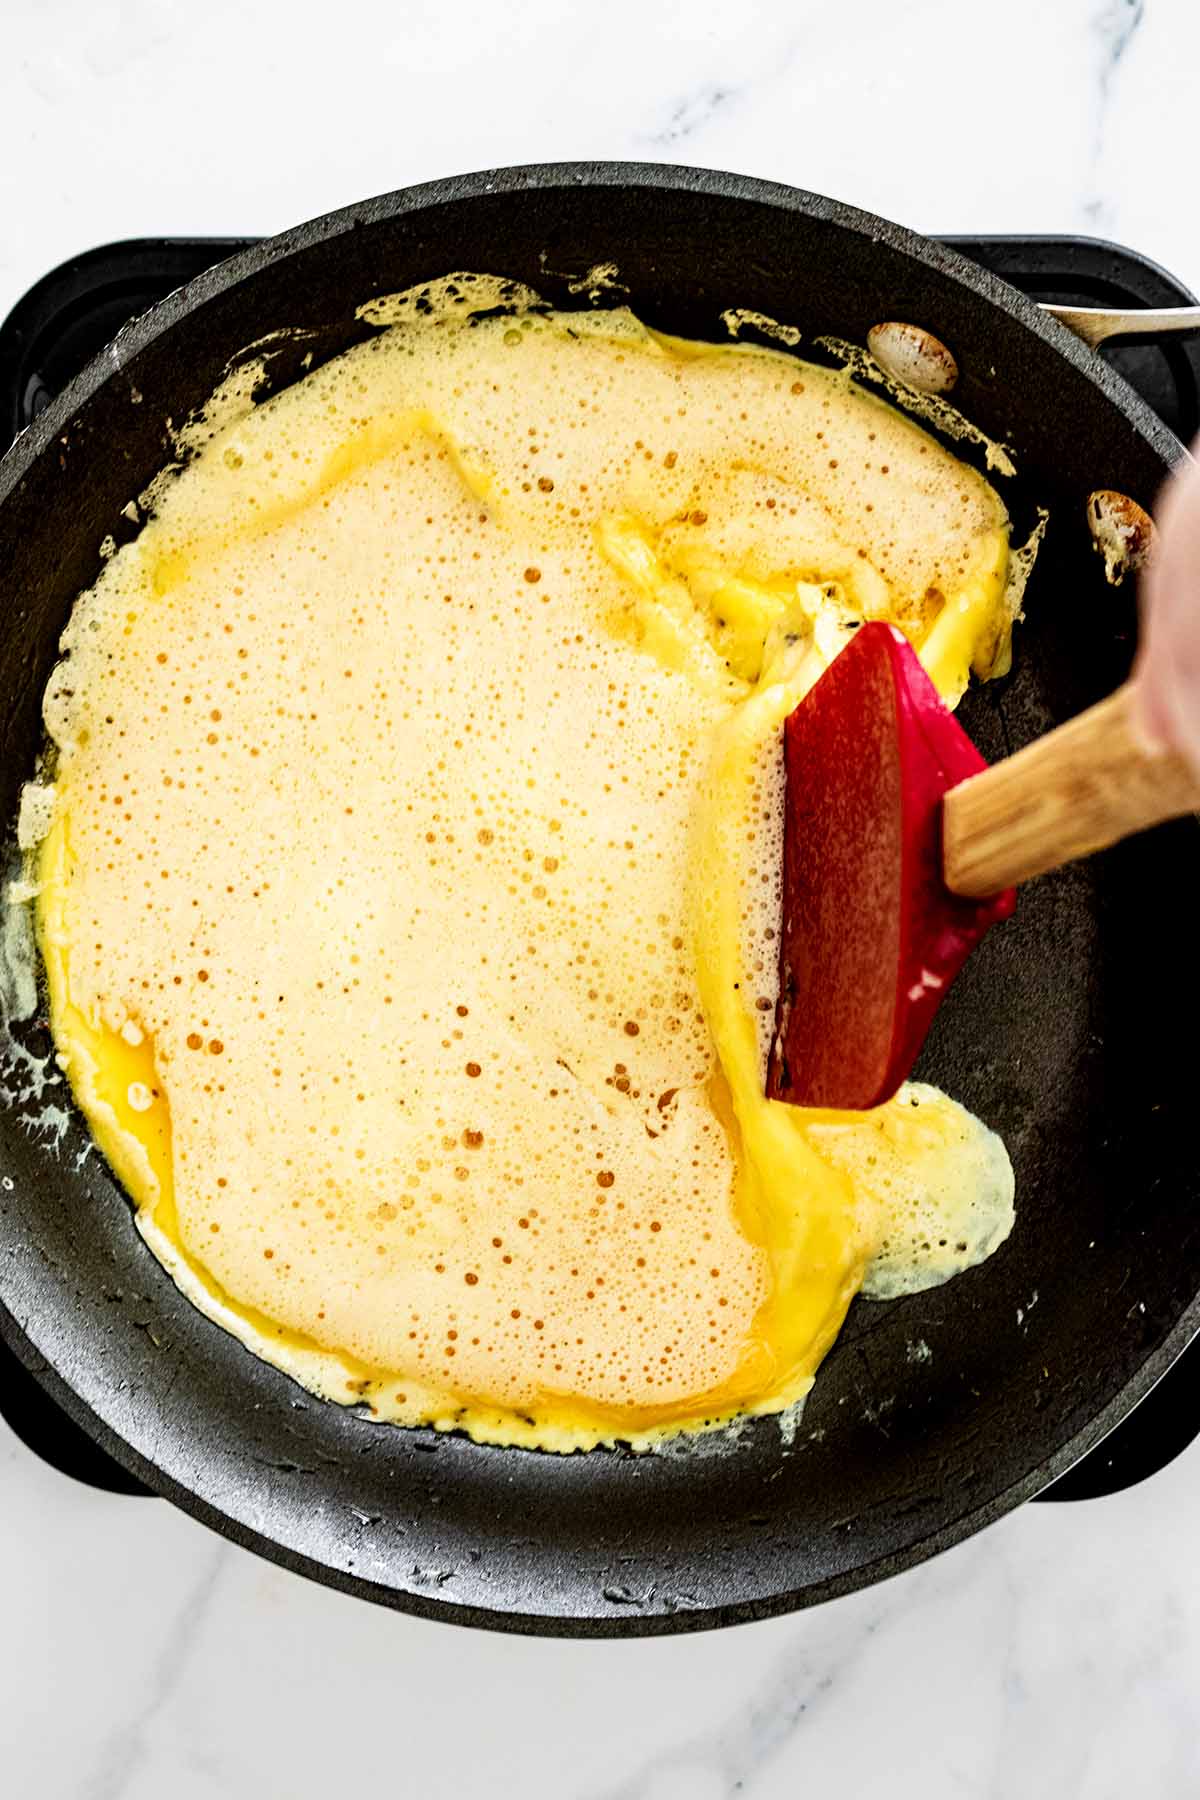 Red spatula pushing edge of semi-cooked eggs toward the center of a skillet